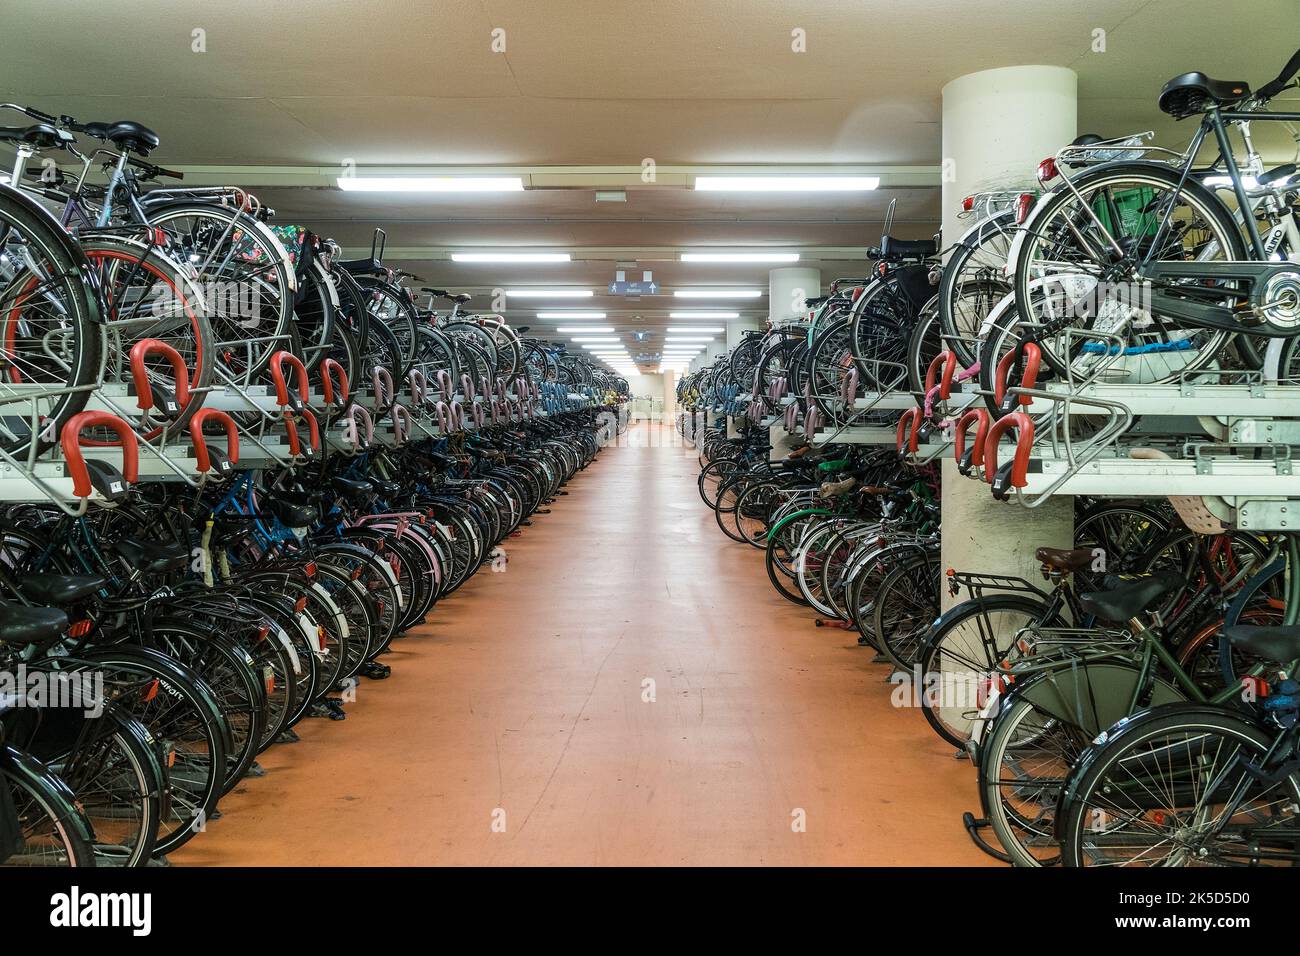 Netherlands, Rotterdam, Centraal station, bicycle parking spaces Stock Photo